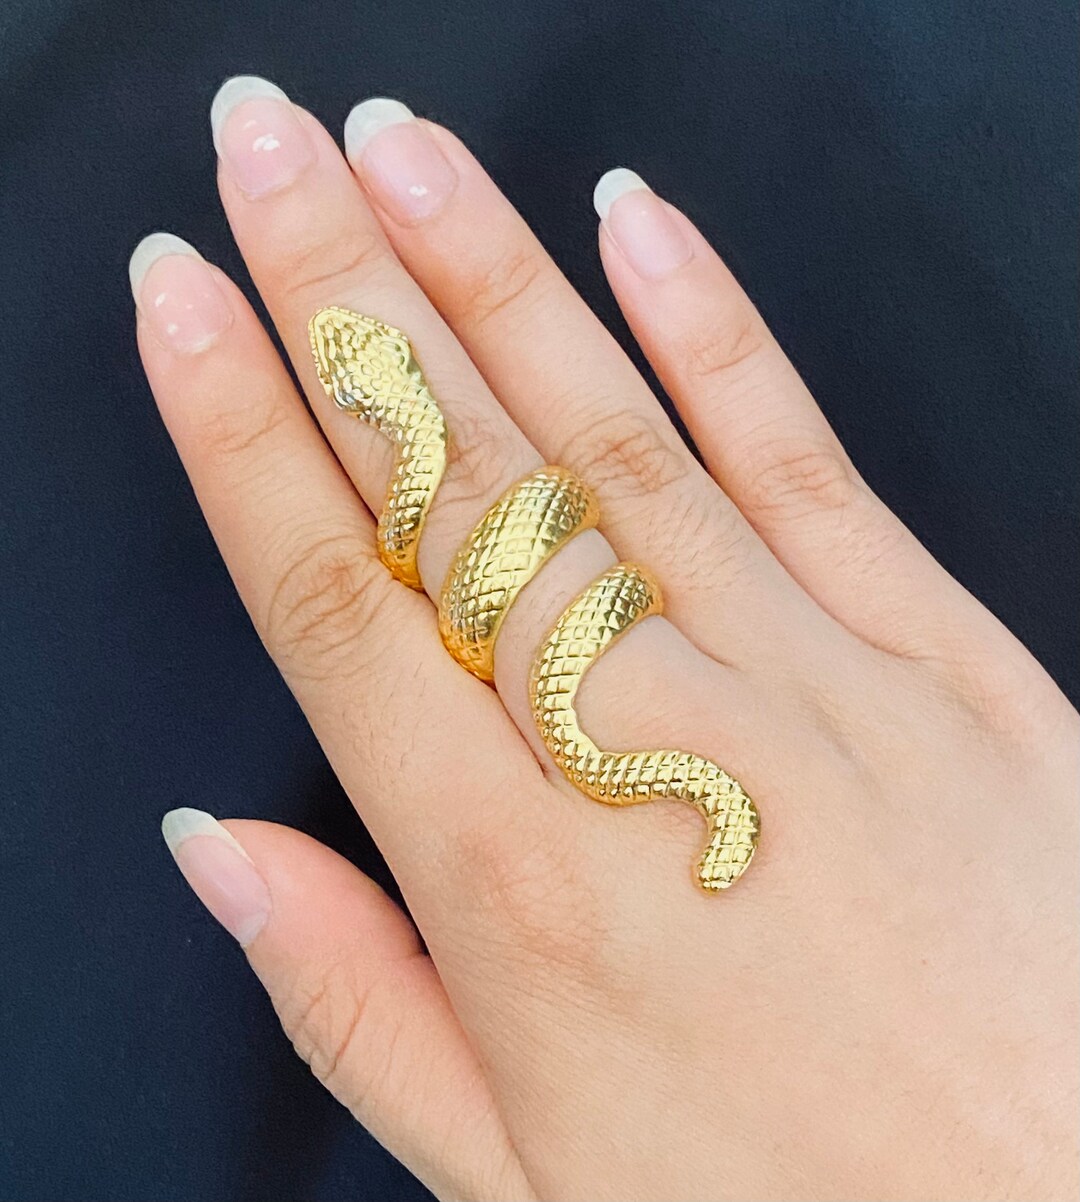 Amazon.com: ZMILY Snake Knuckle Ring Set for Women Teen Girls,Vintage  Stackable Adjustable Open Snake Rings Boho Goth Punk Reptile Serpent Finger  Rings Set Personality Fashion Jewelry Gifts (Snake Ring B): Clothing, Shoes